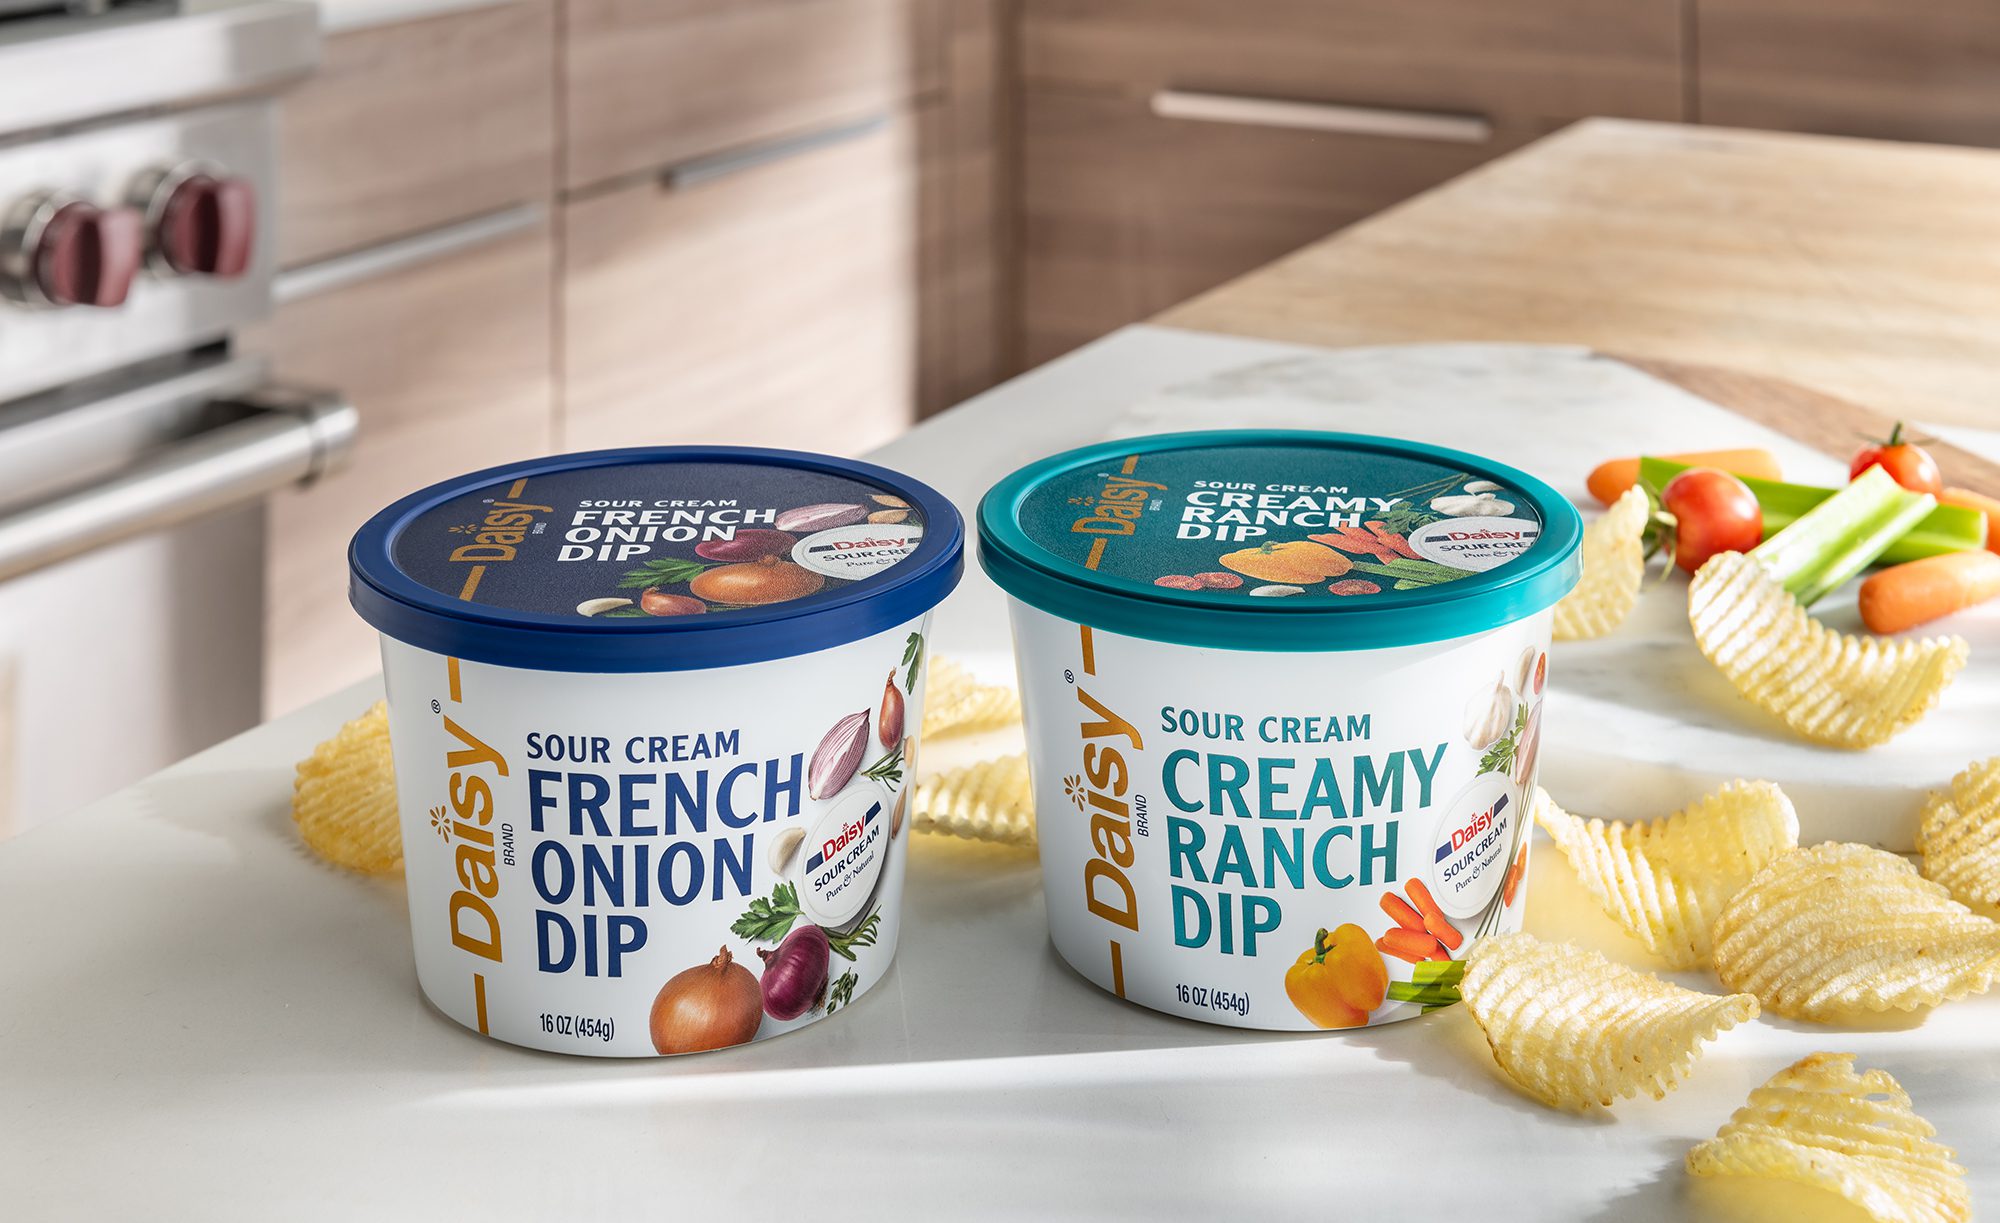 Dips - Daisy Brand - Sour Cream & Cottage Cheese